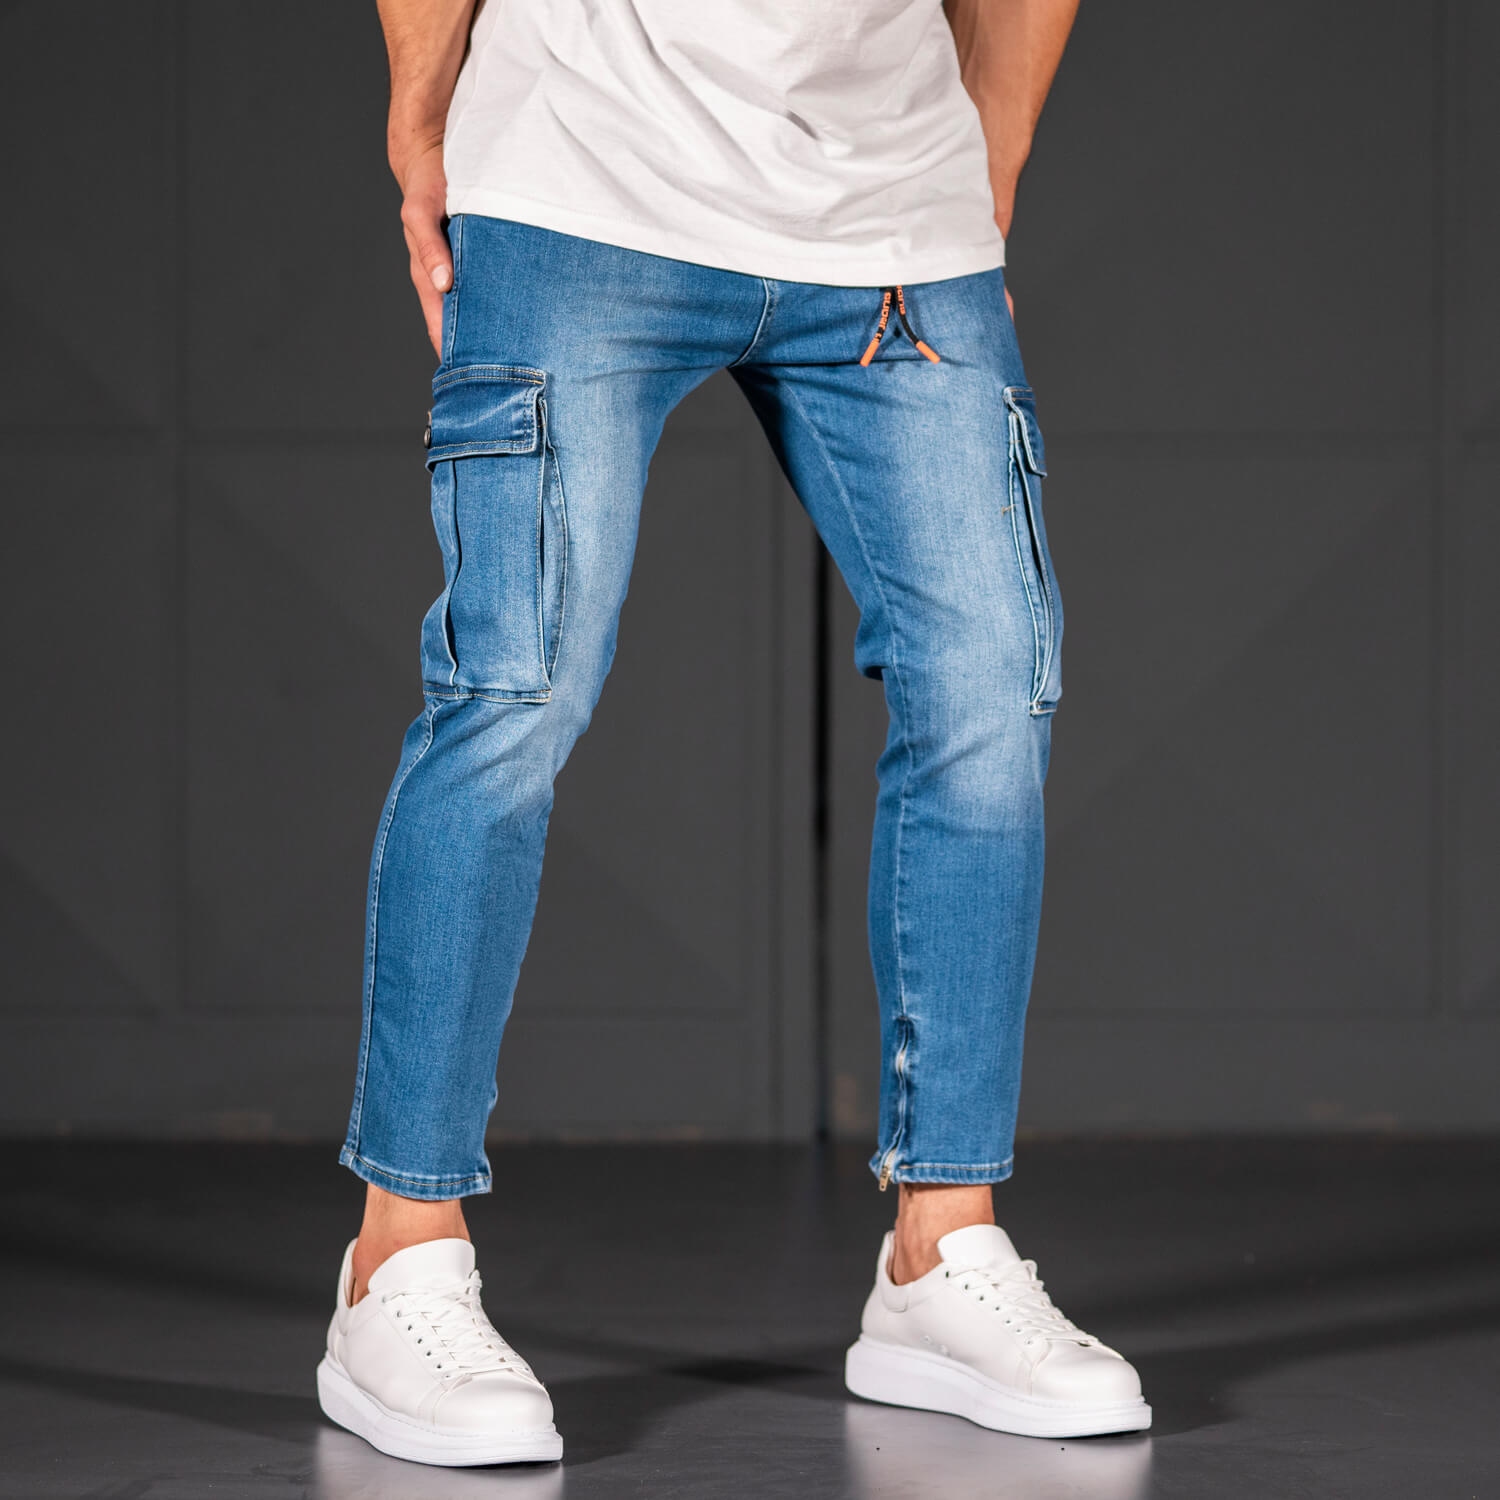 Men's Jeans with Pockets Style in Ocean ...